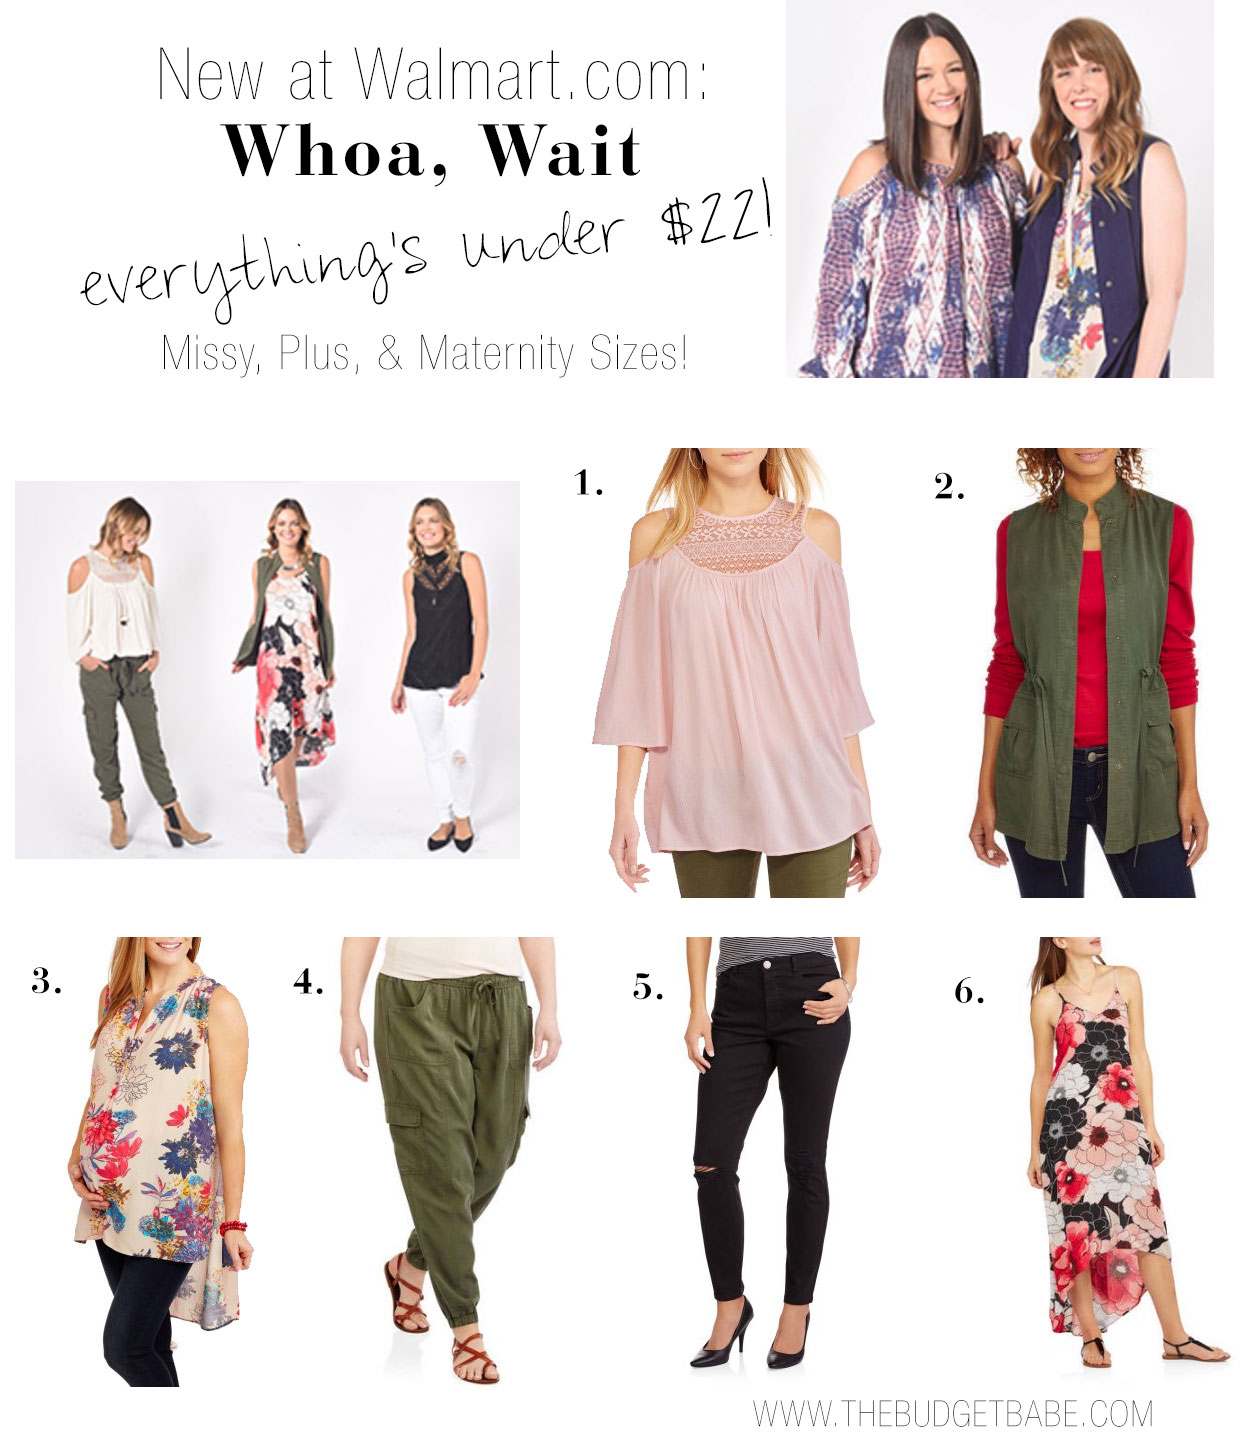 Whoa Wait Walmart offers missy, maternity and plus size fashions under $25! All at Walmart.com.